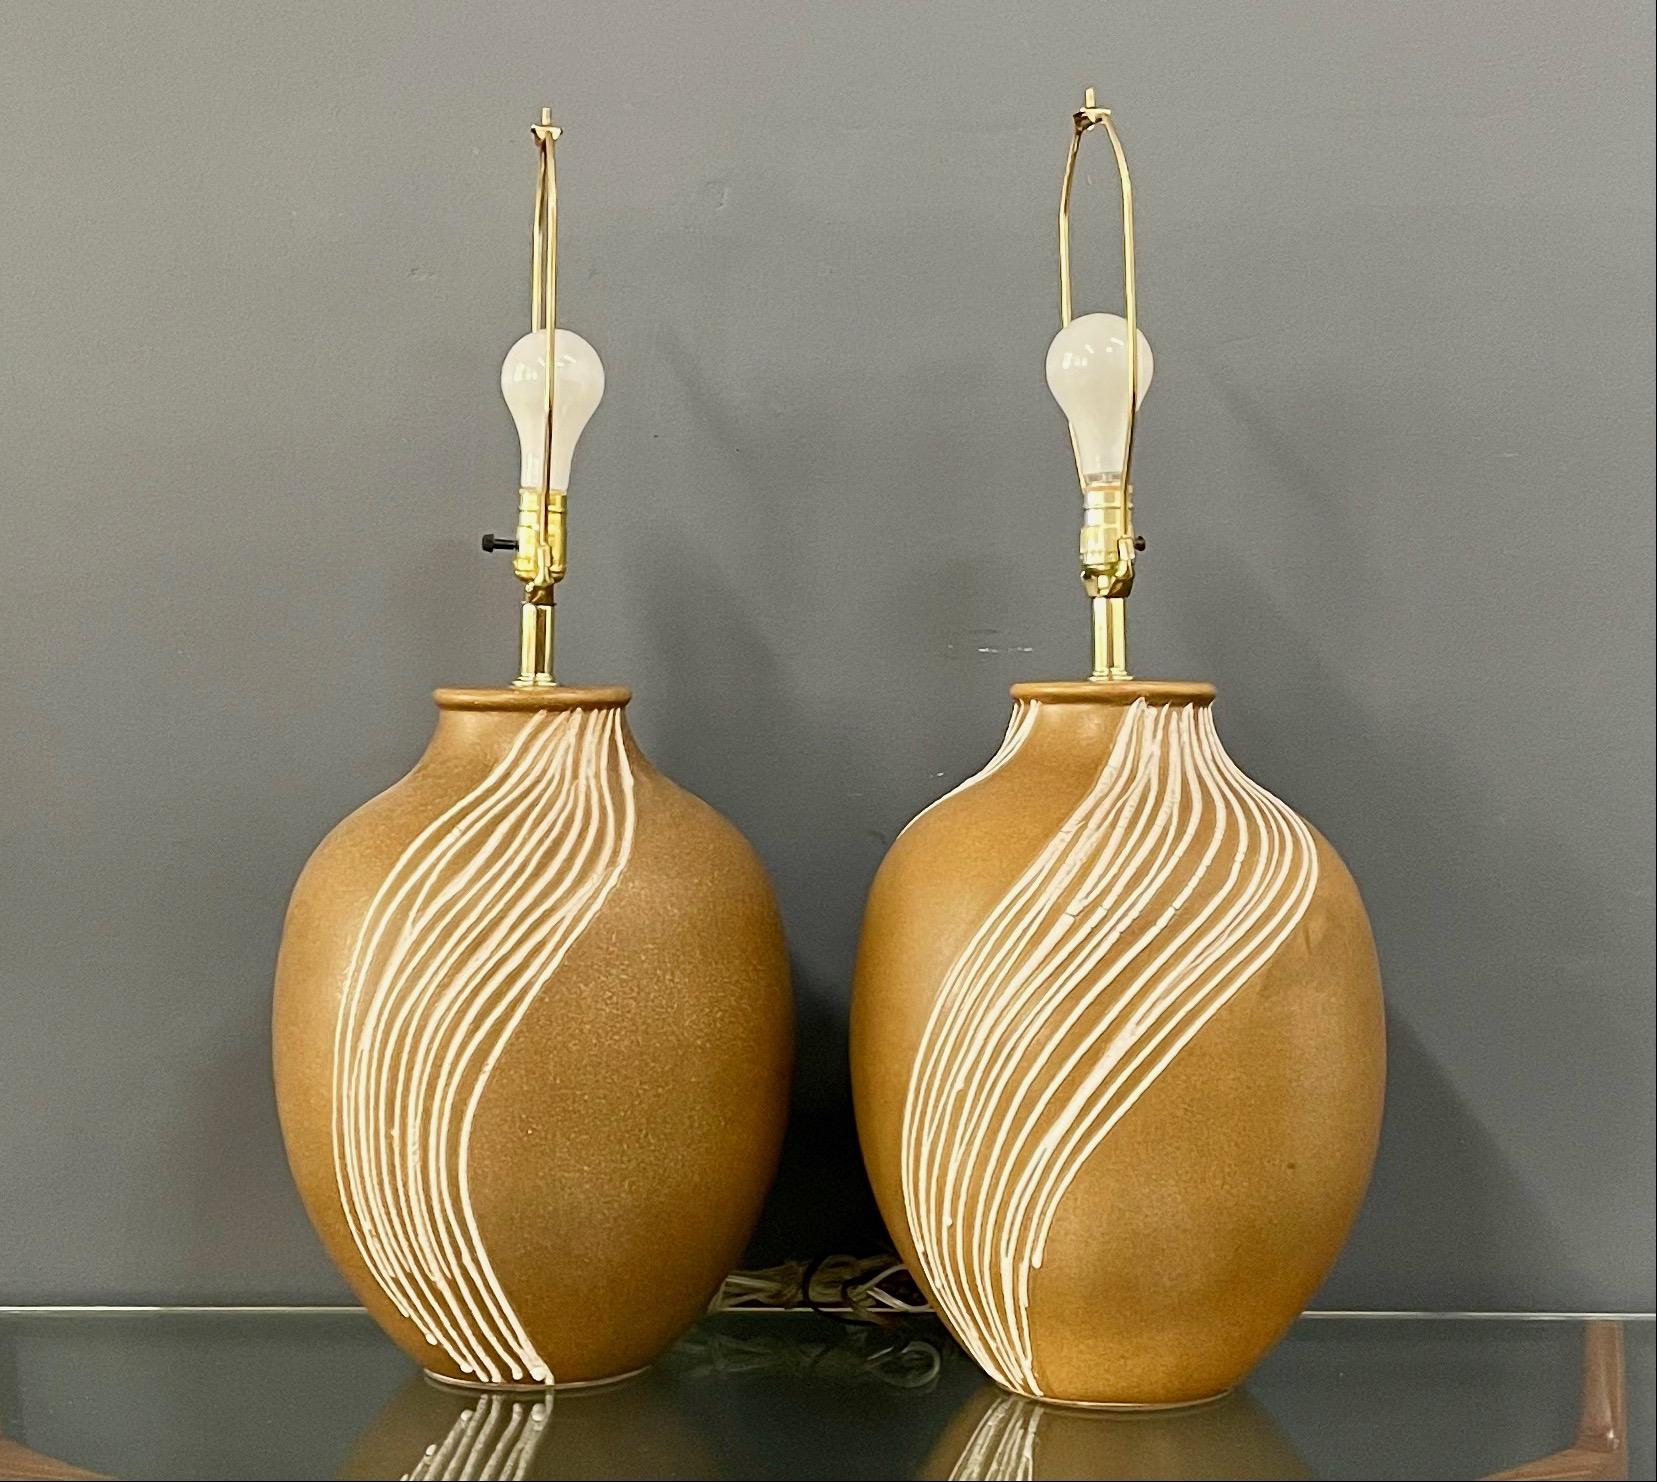 Large ceramic lamps that have a wave design in applied white stripes in a wave pattern.